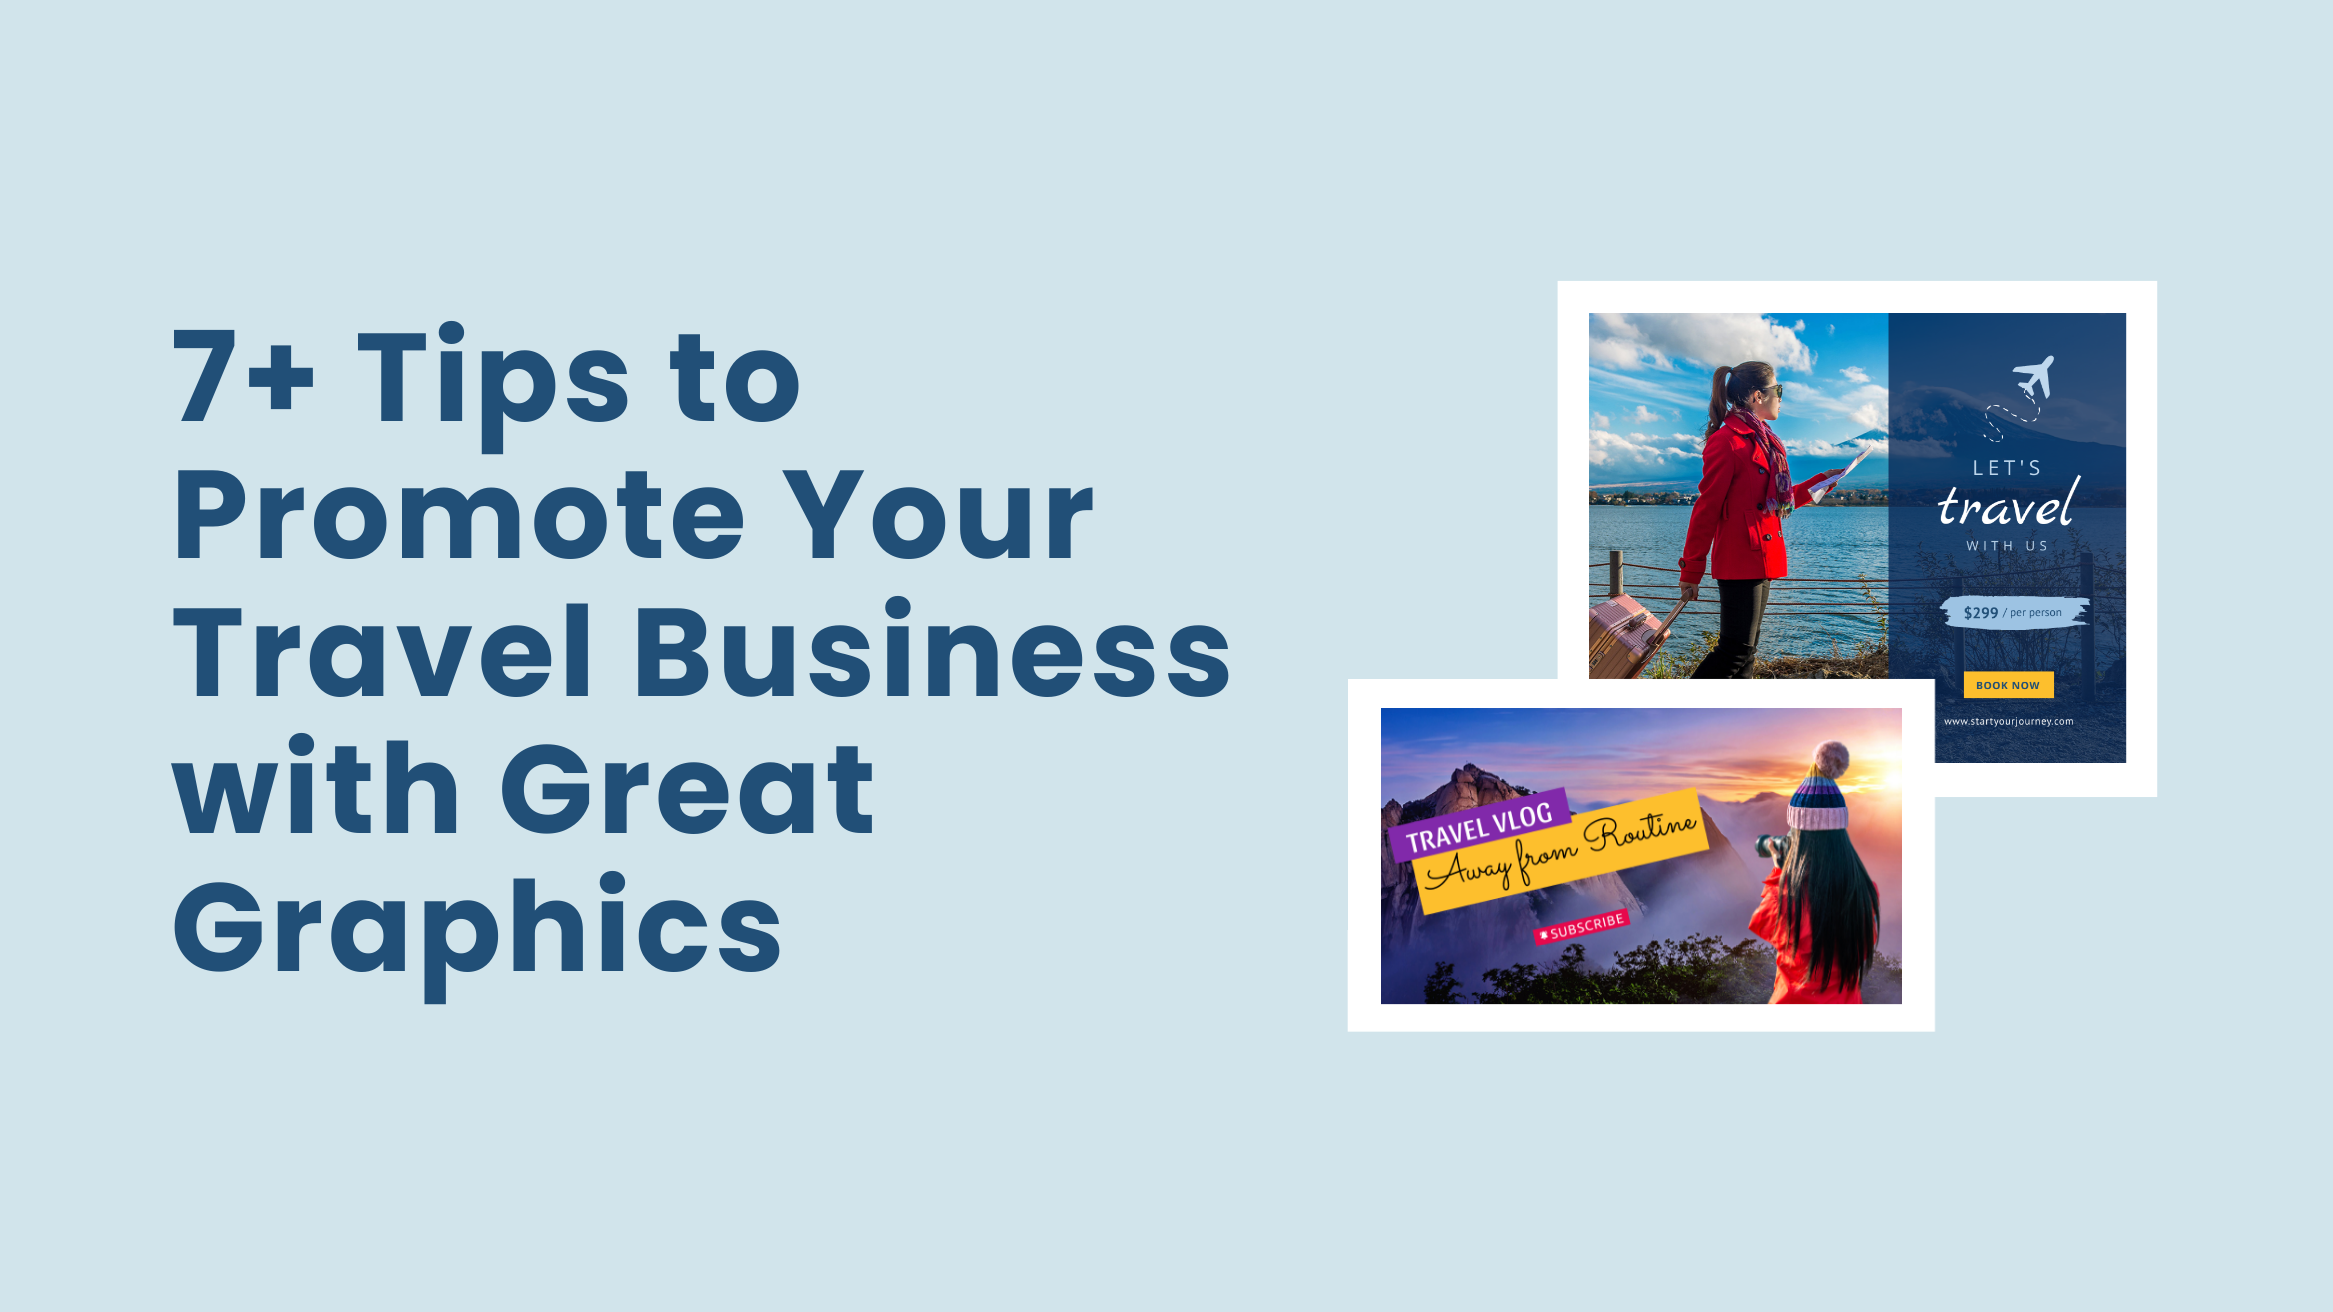 Tips to Promote Your Travel Business with Great Graphics